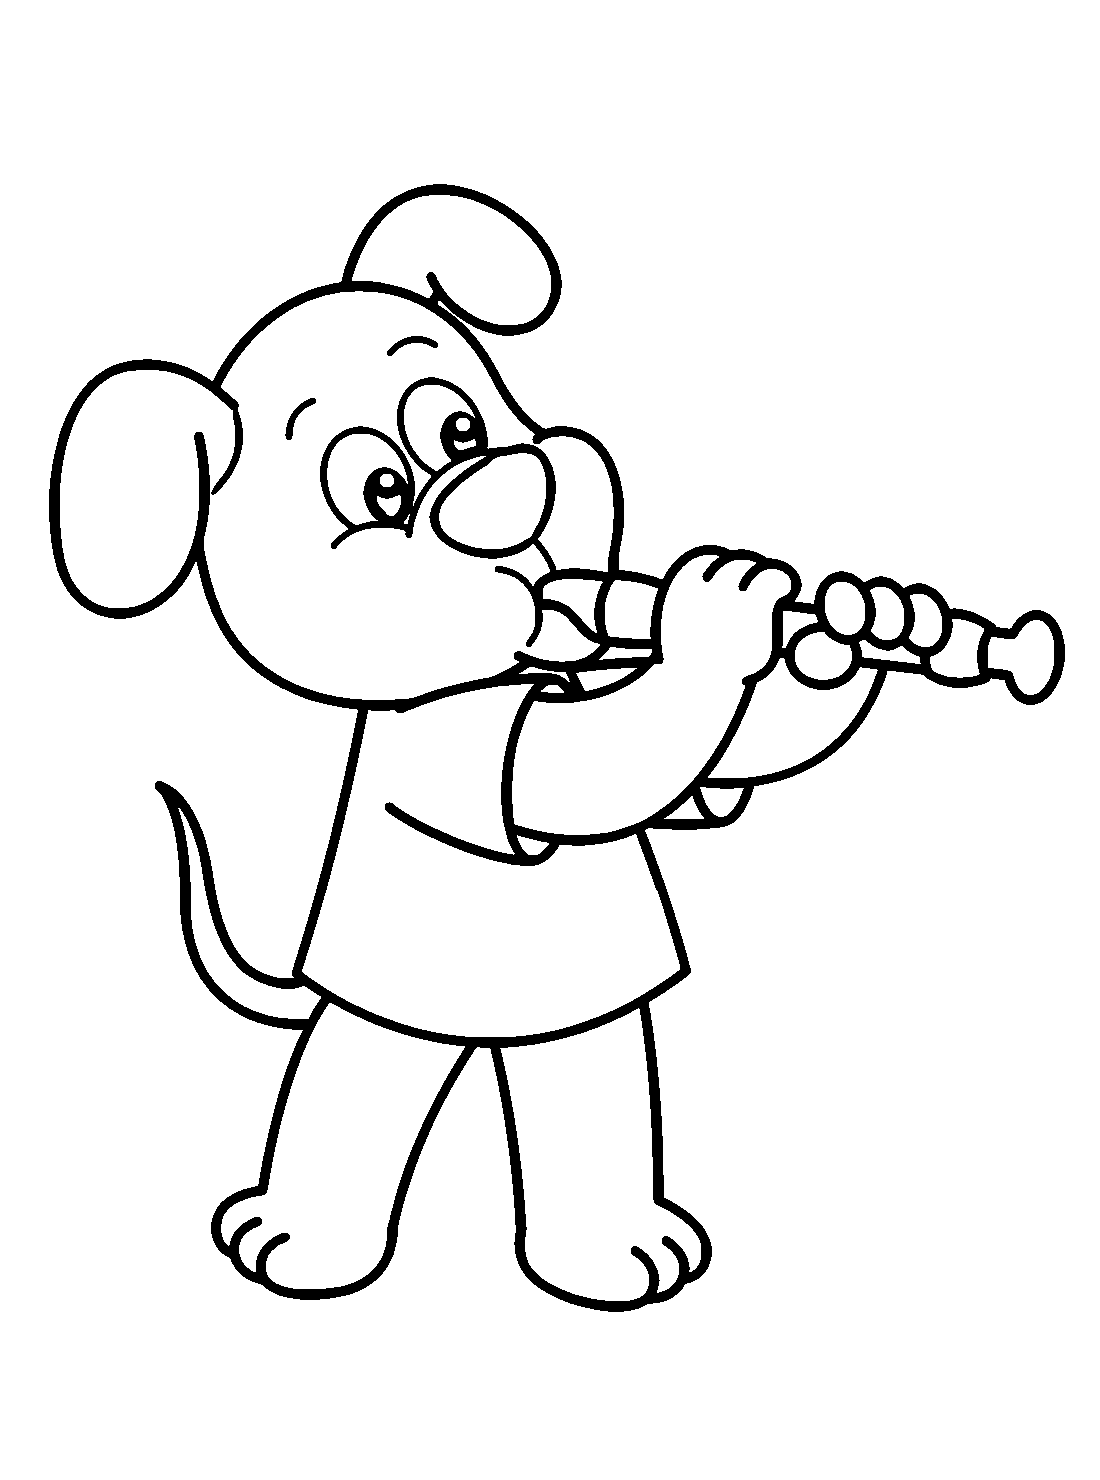 Cute dog with flute